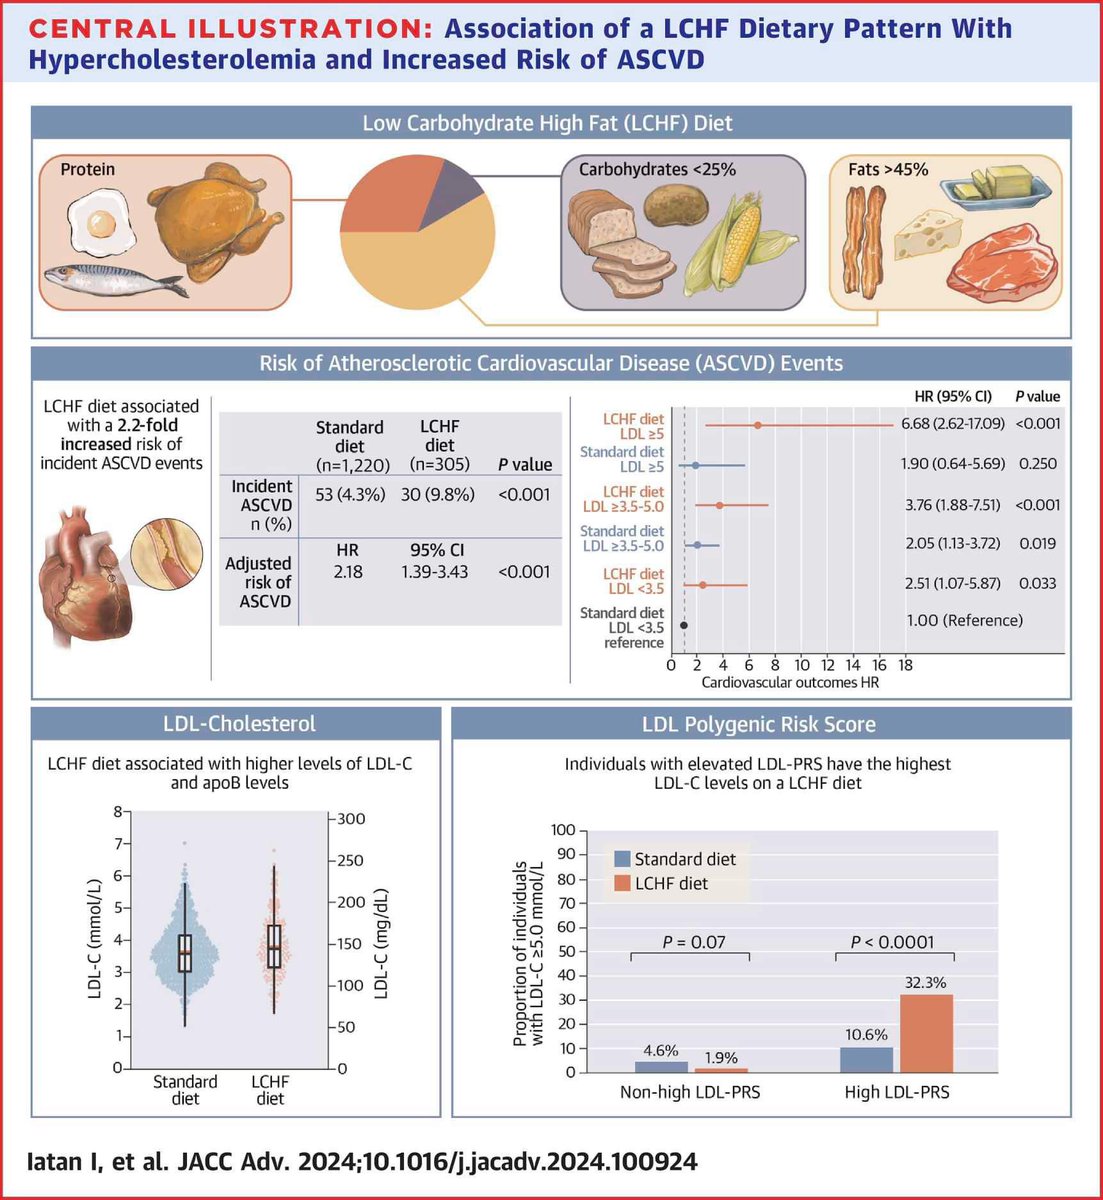 Nice new paper from the UK Biobank shows a low-carbohydrate high-fat (LCHF) diet is associated with higher levels of LDL cholesterol and Apo B, nearly double the prevalence of severe hypercholesterolemia and a 2.2-fold increase in risk of atherosclerotic cardiovascular disease